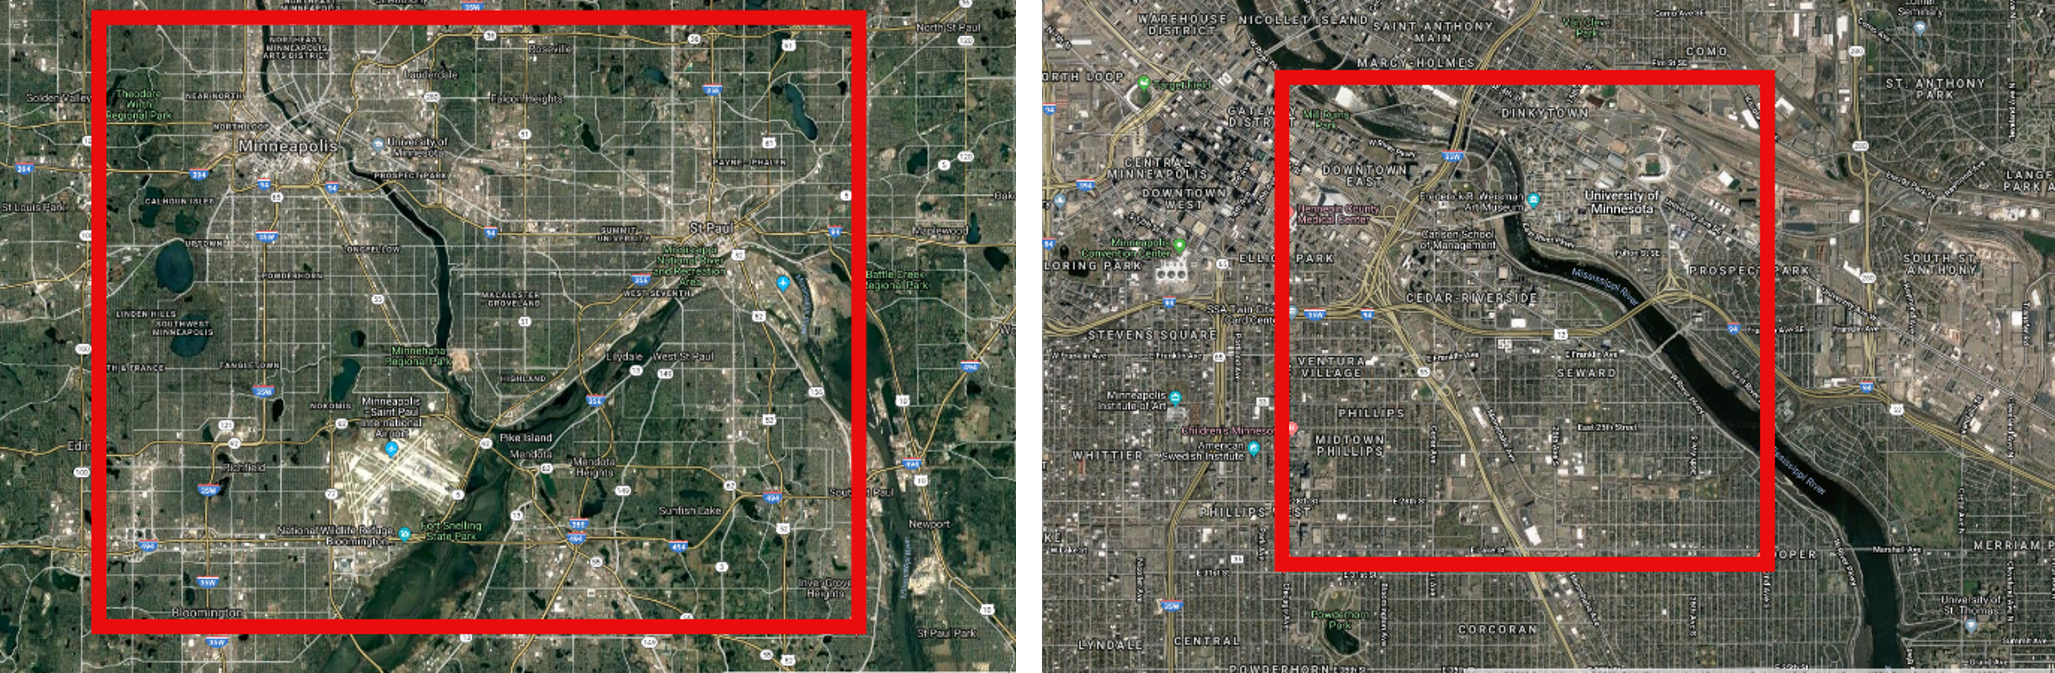 an aerial map view of the Twin Cities metro area and an aerial map view of the University of Minnesota campus, both outlined in red on the map